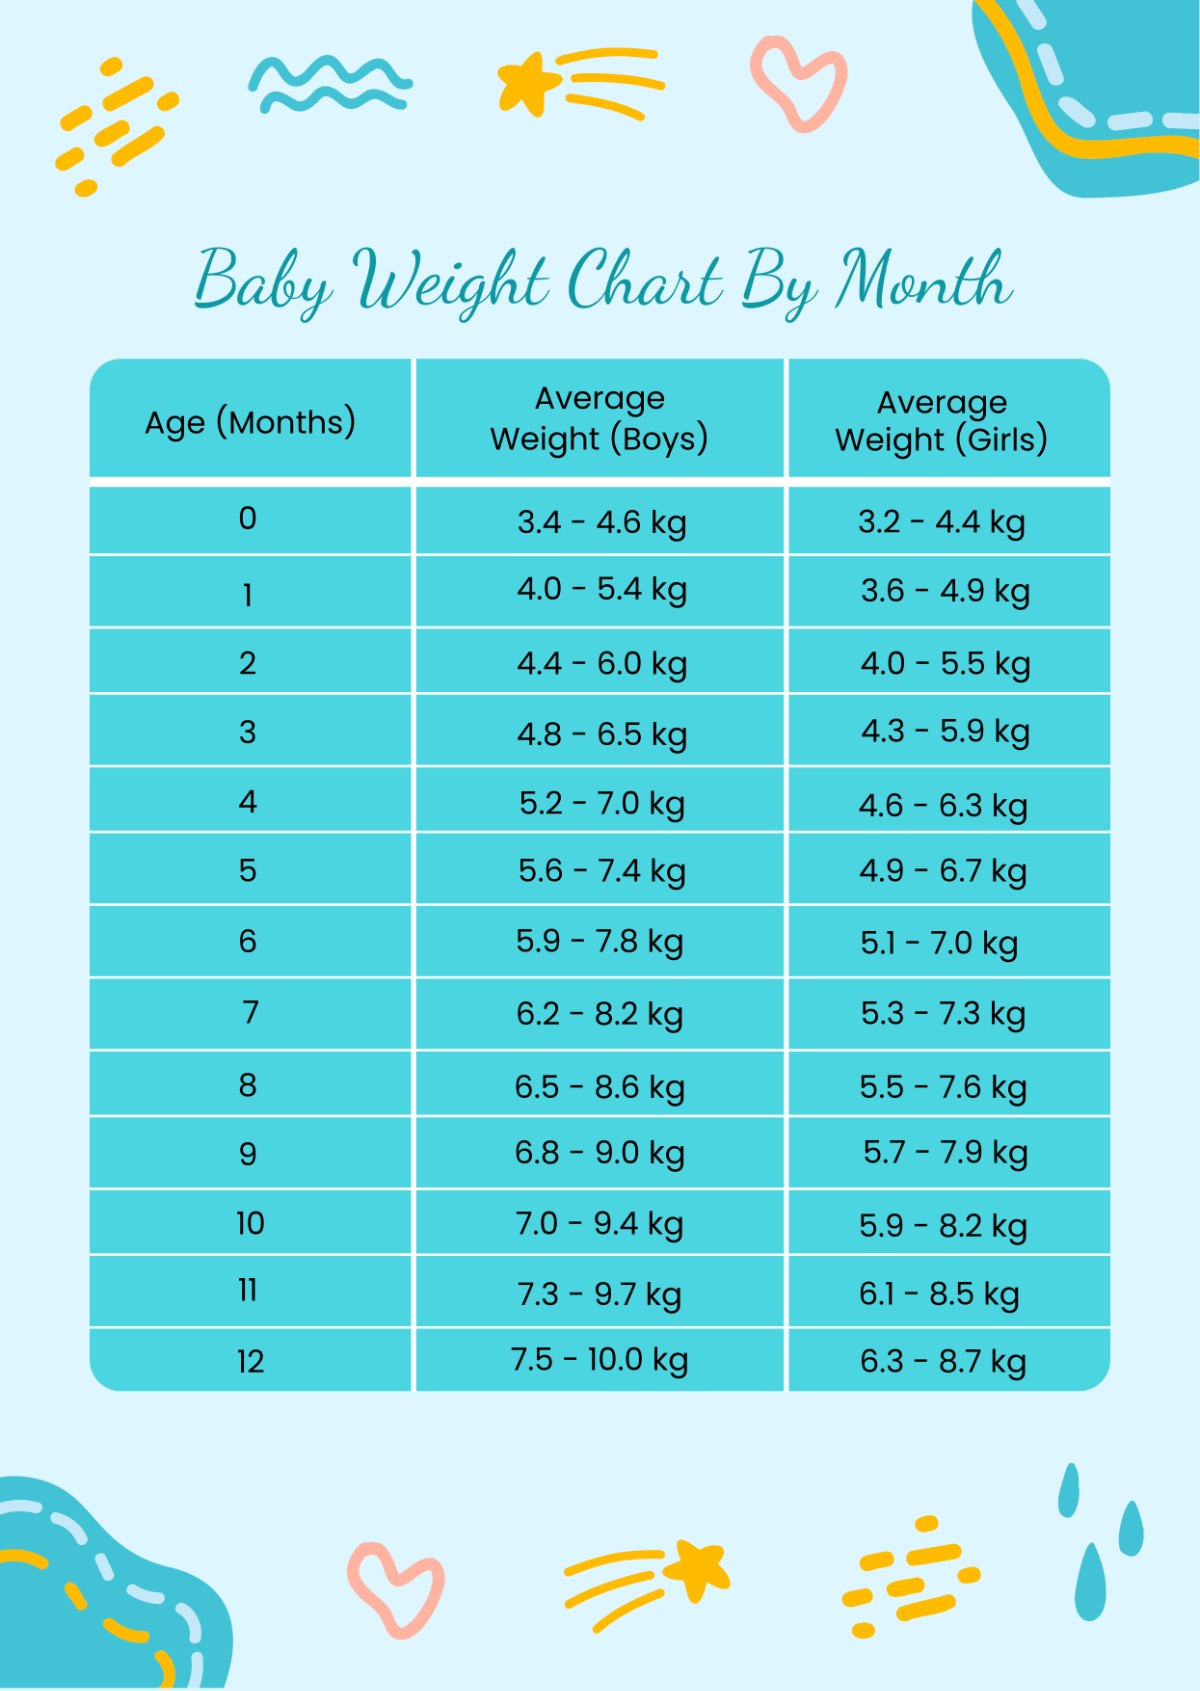 Baby Weight Chart By Month